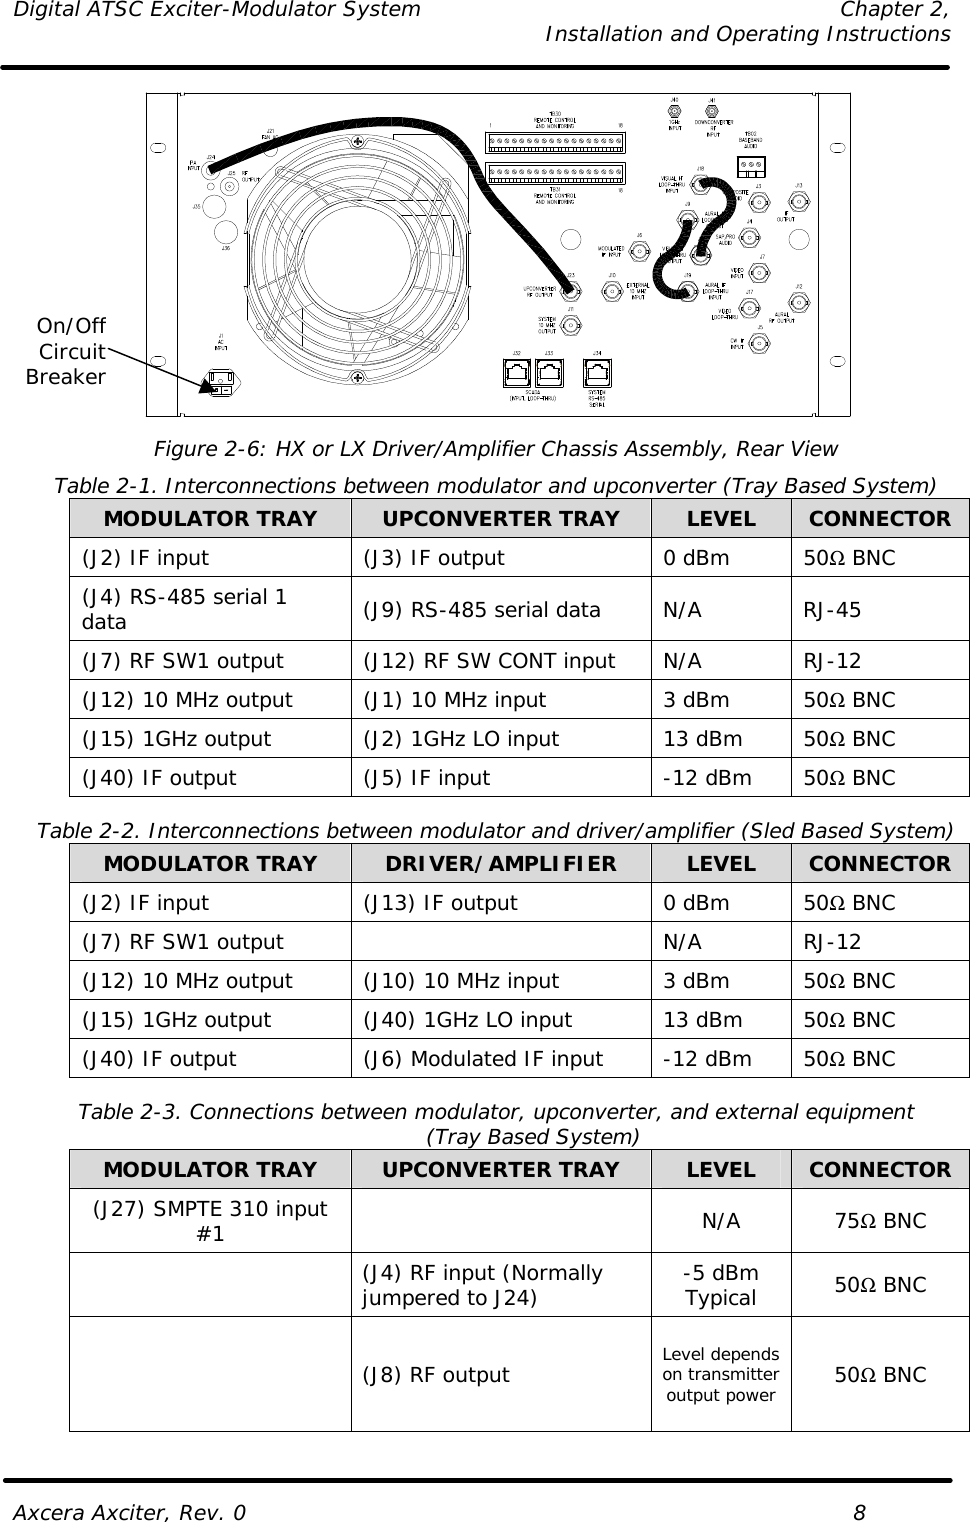 Digital ATSC Exciter-Modulator System Chapter 2,   Installation and Operating Instructions  Axcera Axciter, Rev. 0    8  Figure 2-6: HX or LX Driver/Amplifier Chassis Assembly, Rear View Table 2-1. Interconnections between modulator and upconverter (Tray Based System) MODULATOR TRAY UPCONVERTER TRAY LEVEL CONNECTOR (J2) IF input (J3) IF output 0 dBm 50Ω BNC (J4) RS-485 serial 1 data (J9) RS-485 serial data N/A RJ-45 (J7) RF SW1 output (J12) RF SW CONT input N/A RJ-12 (J12) 10 MHz output (J1) 10 MHz input 3 dBm 50Ω BNC (J15) 1GHz output (J2) 1GHz LO input 13 dBm 50Ω BNC (J40) IF output (J5) IF input -12 dBm 50Ω BNC  Table 2-2. Interconnections between modulator and driver/amplifier (Sled Based System) MODULATOR TRAY DRIVER/AMPLIFIER LEVEL CONNECTOR (J2) IF input (J13) IF output 0 dBm 50Ω BNC (J7) RF SW1 output    N/A RJ-12 (J12) 10 MHz output (J10) 10 MHz input 3 dBm 50Ω BNC (J15) 1GHz output (J40) 1GHz LO input 13 dBm 50Ω BNC (J40) IF output (J6) Modulated IF input -12 dBm 50Ω BNC  Table 2-3. Connections between modulator, upconverter, and external equipment (Tray Based System) MODULATOR TRAY UPCONVERTER TRAY LEVEL CONNECTOR (J27) SMPTE 310 input #1  N/A 75Ω BNC  (J4) RF input (Normally jumpered to J24) -5 dBm Typical 50Ω BNC  (J8) RF output Level depends on transmitter output power  50Ω BNC  On/Off Circuit Breaker